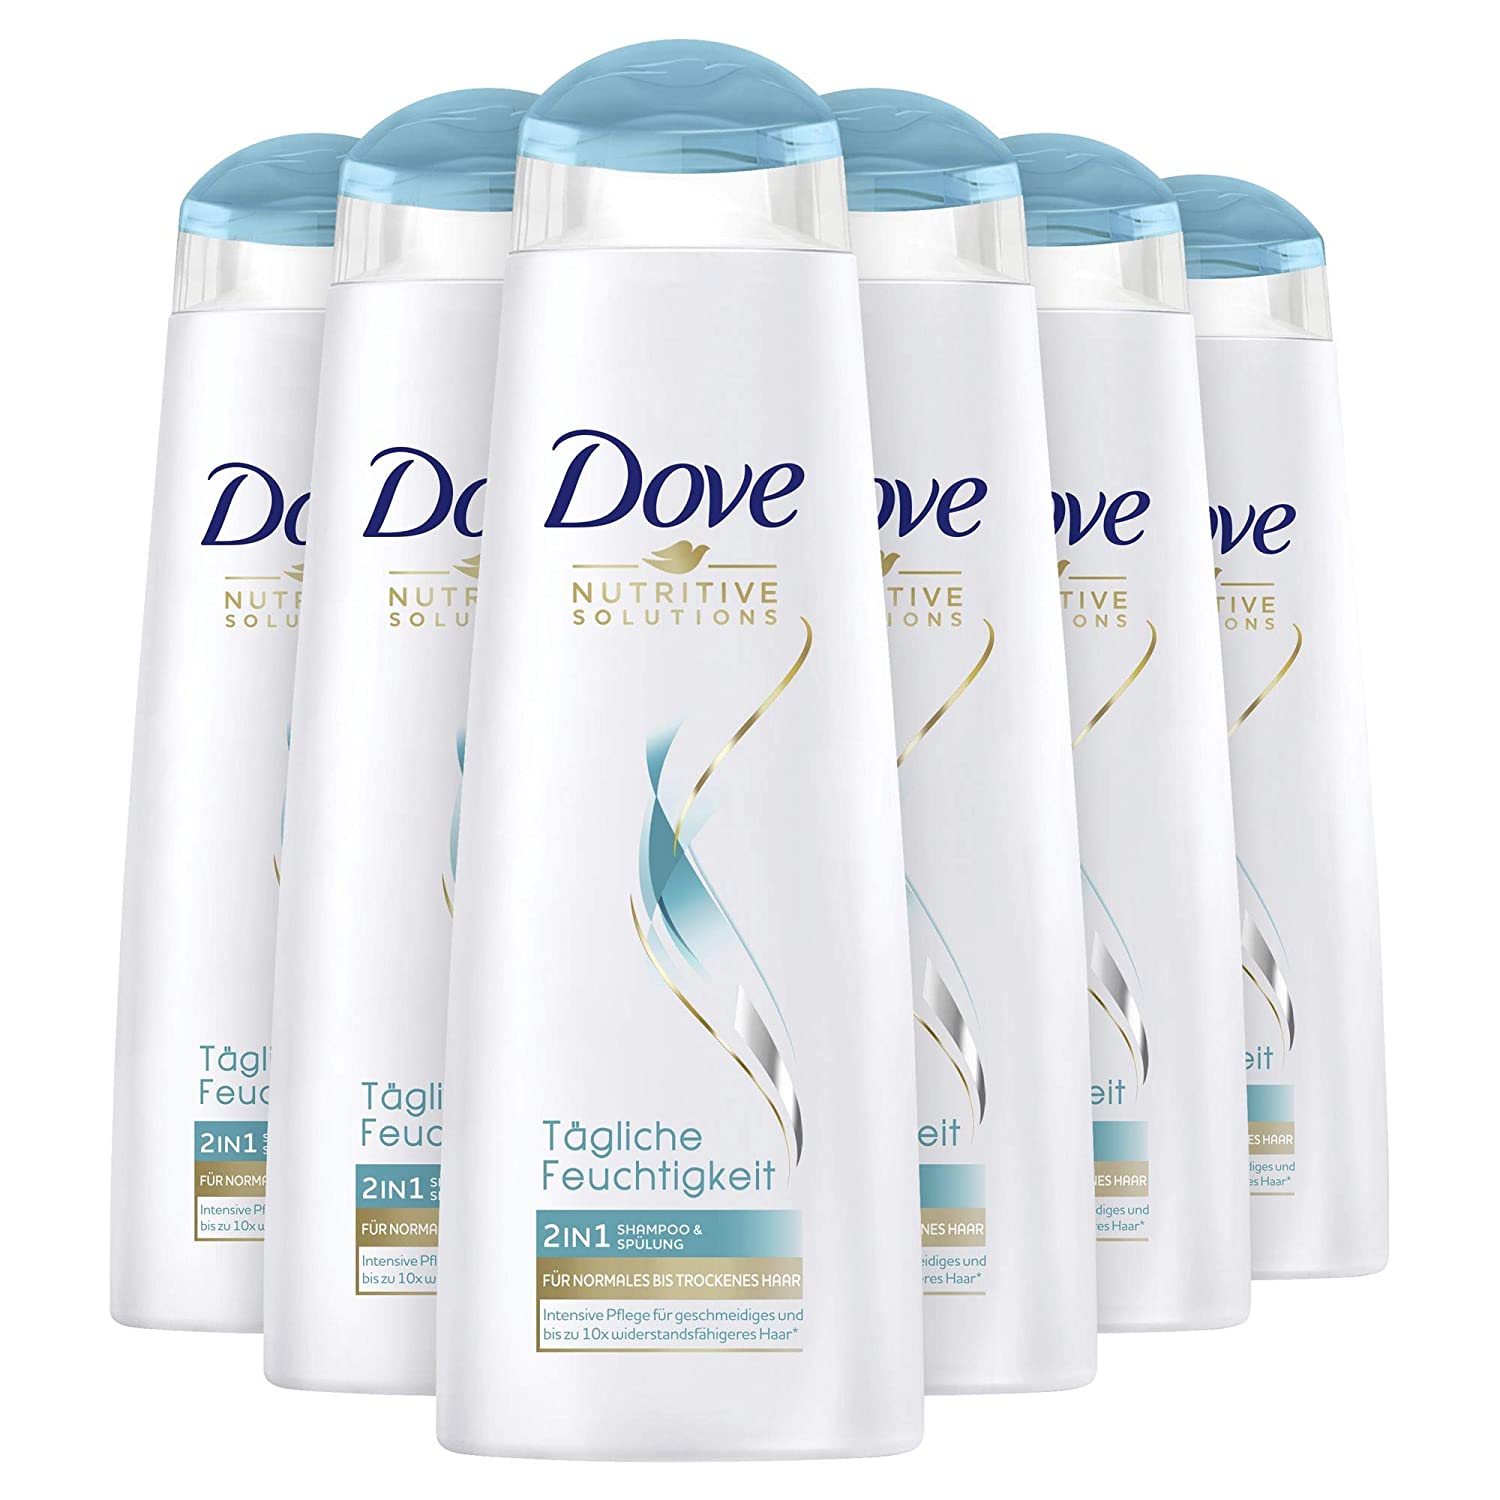 Dove Nutritive Solutions 2in1 shampoo & conditioner for normal to dry hair Daily moisture shampoo and conditioner, 6-pack (6 x 250 ml)